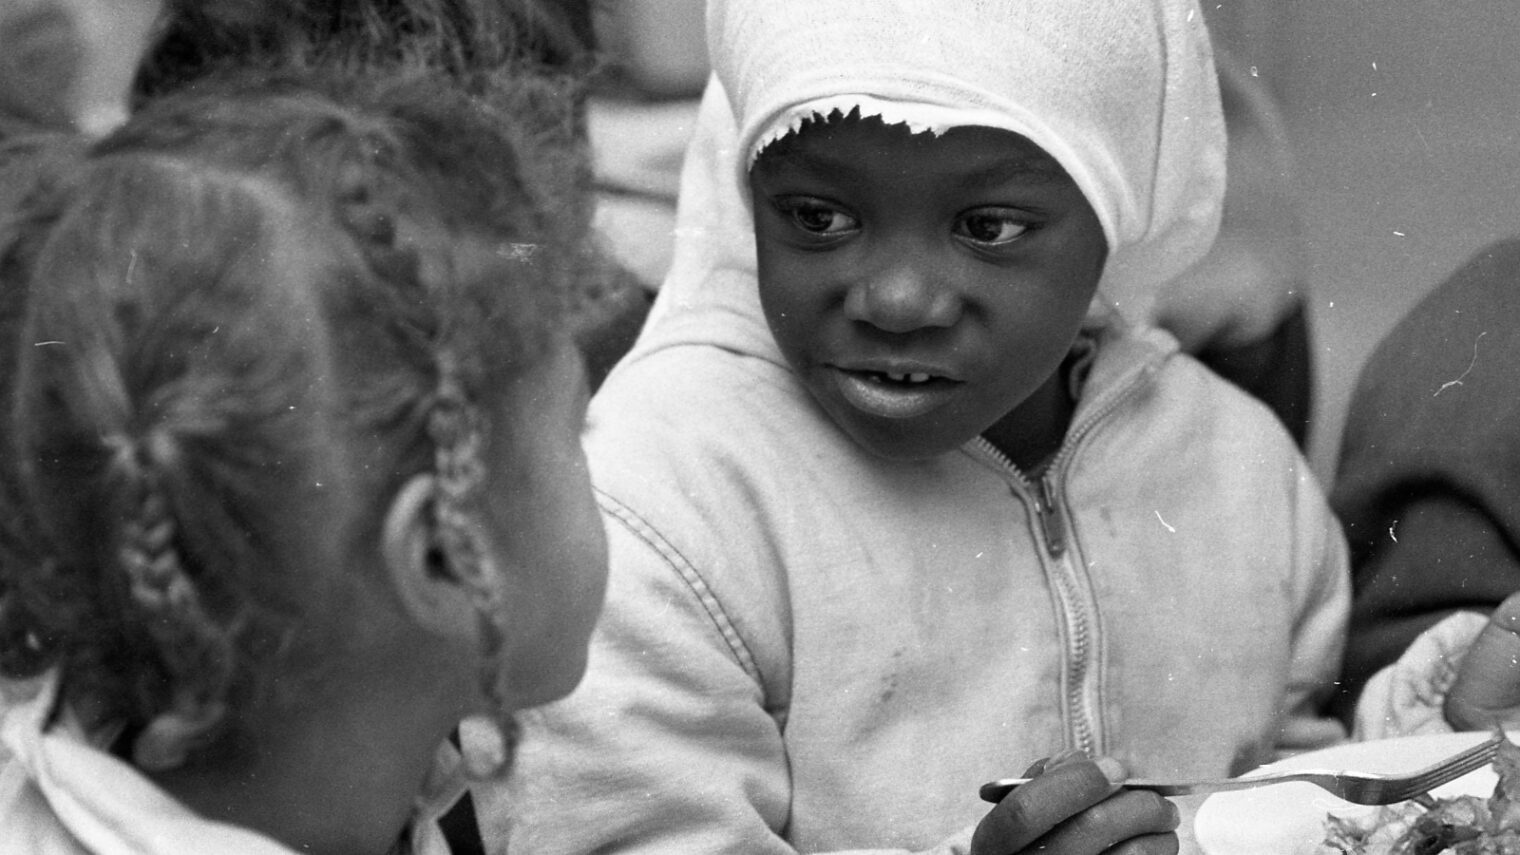 This was taken in January 1970, a few weeks after the African Hebrew Israelite community arrived in Dimona. Photo by IPPA staff, courtesy of the Dan Hadani Archive, Pritzker Family National Photography Collection, National Library of Israel